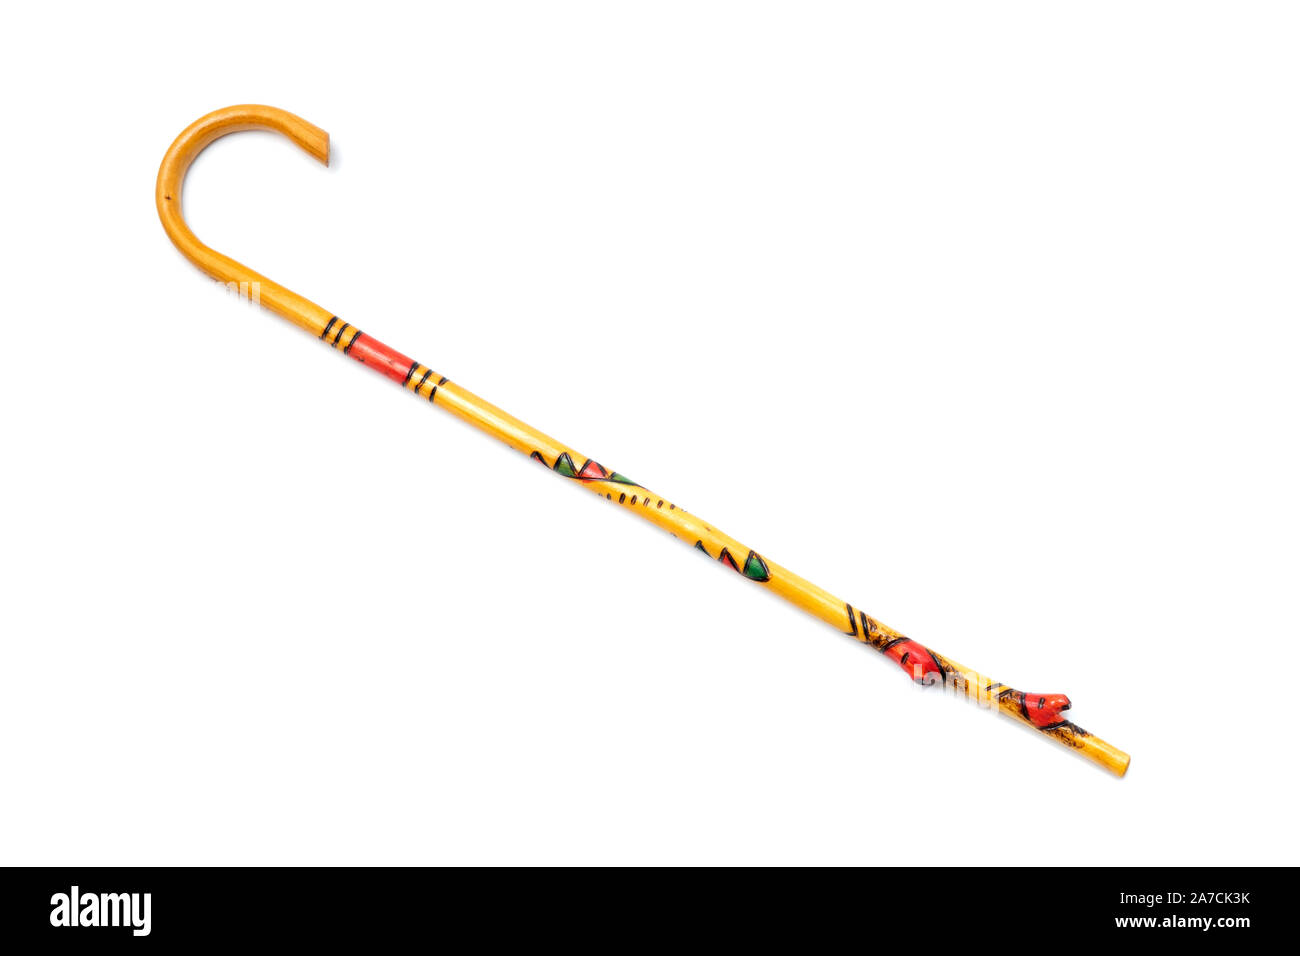 The walking Stick is the most popular tourist souvenir from Sigulda, Latvia  Stock Photo - Alamy